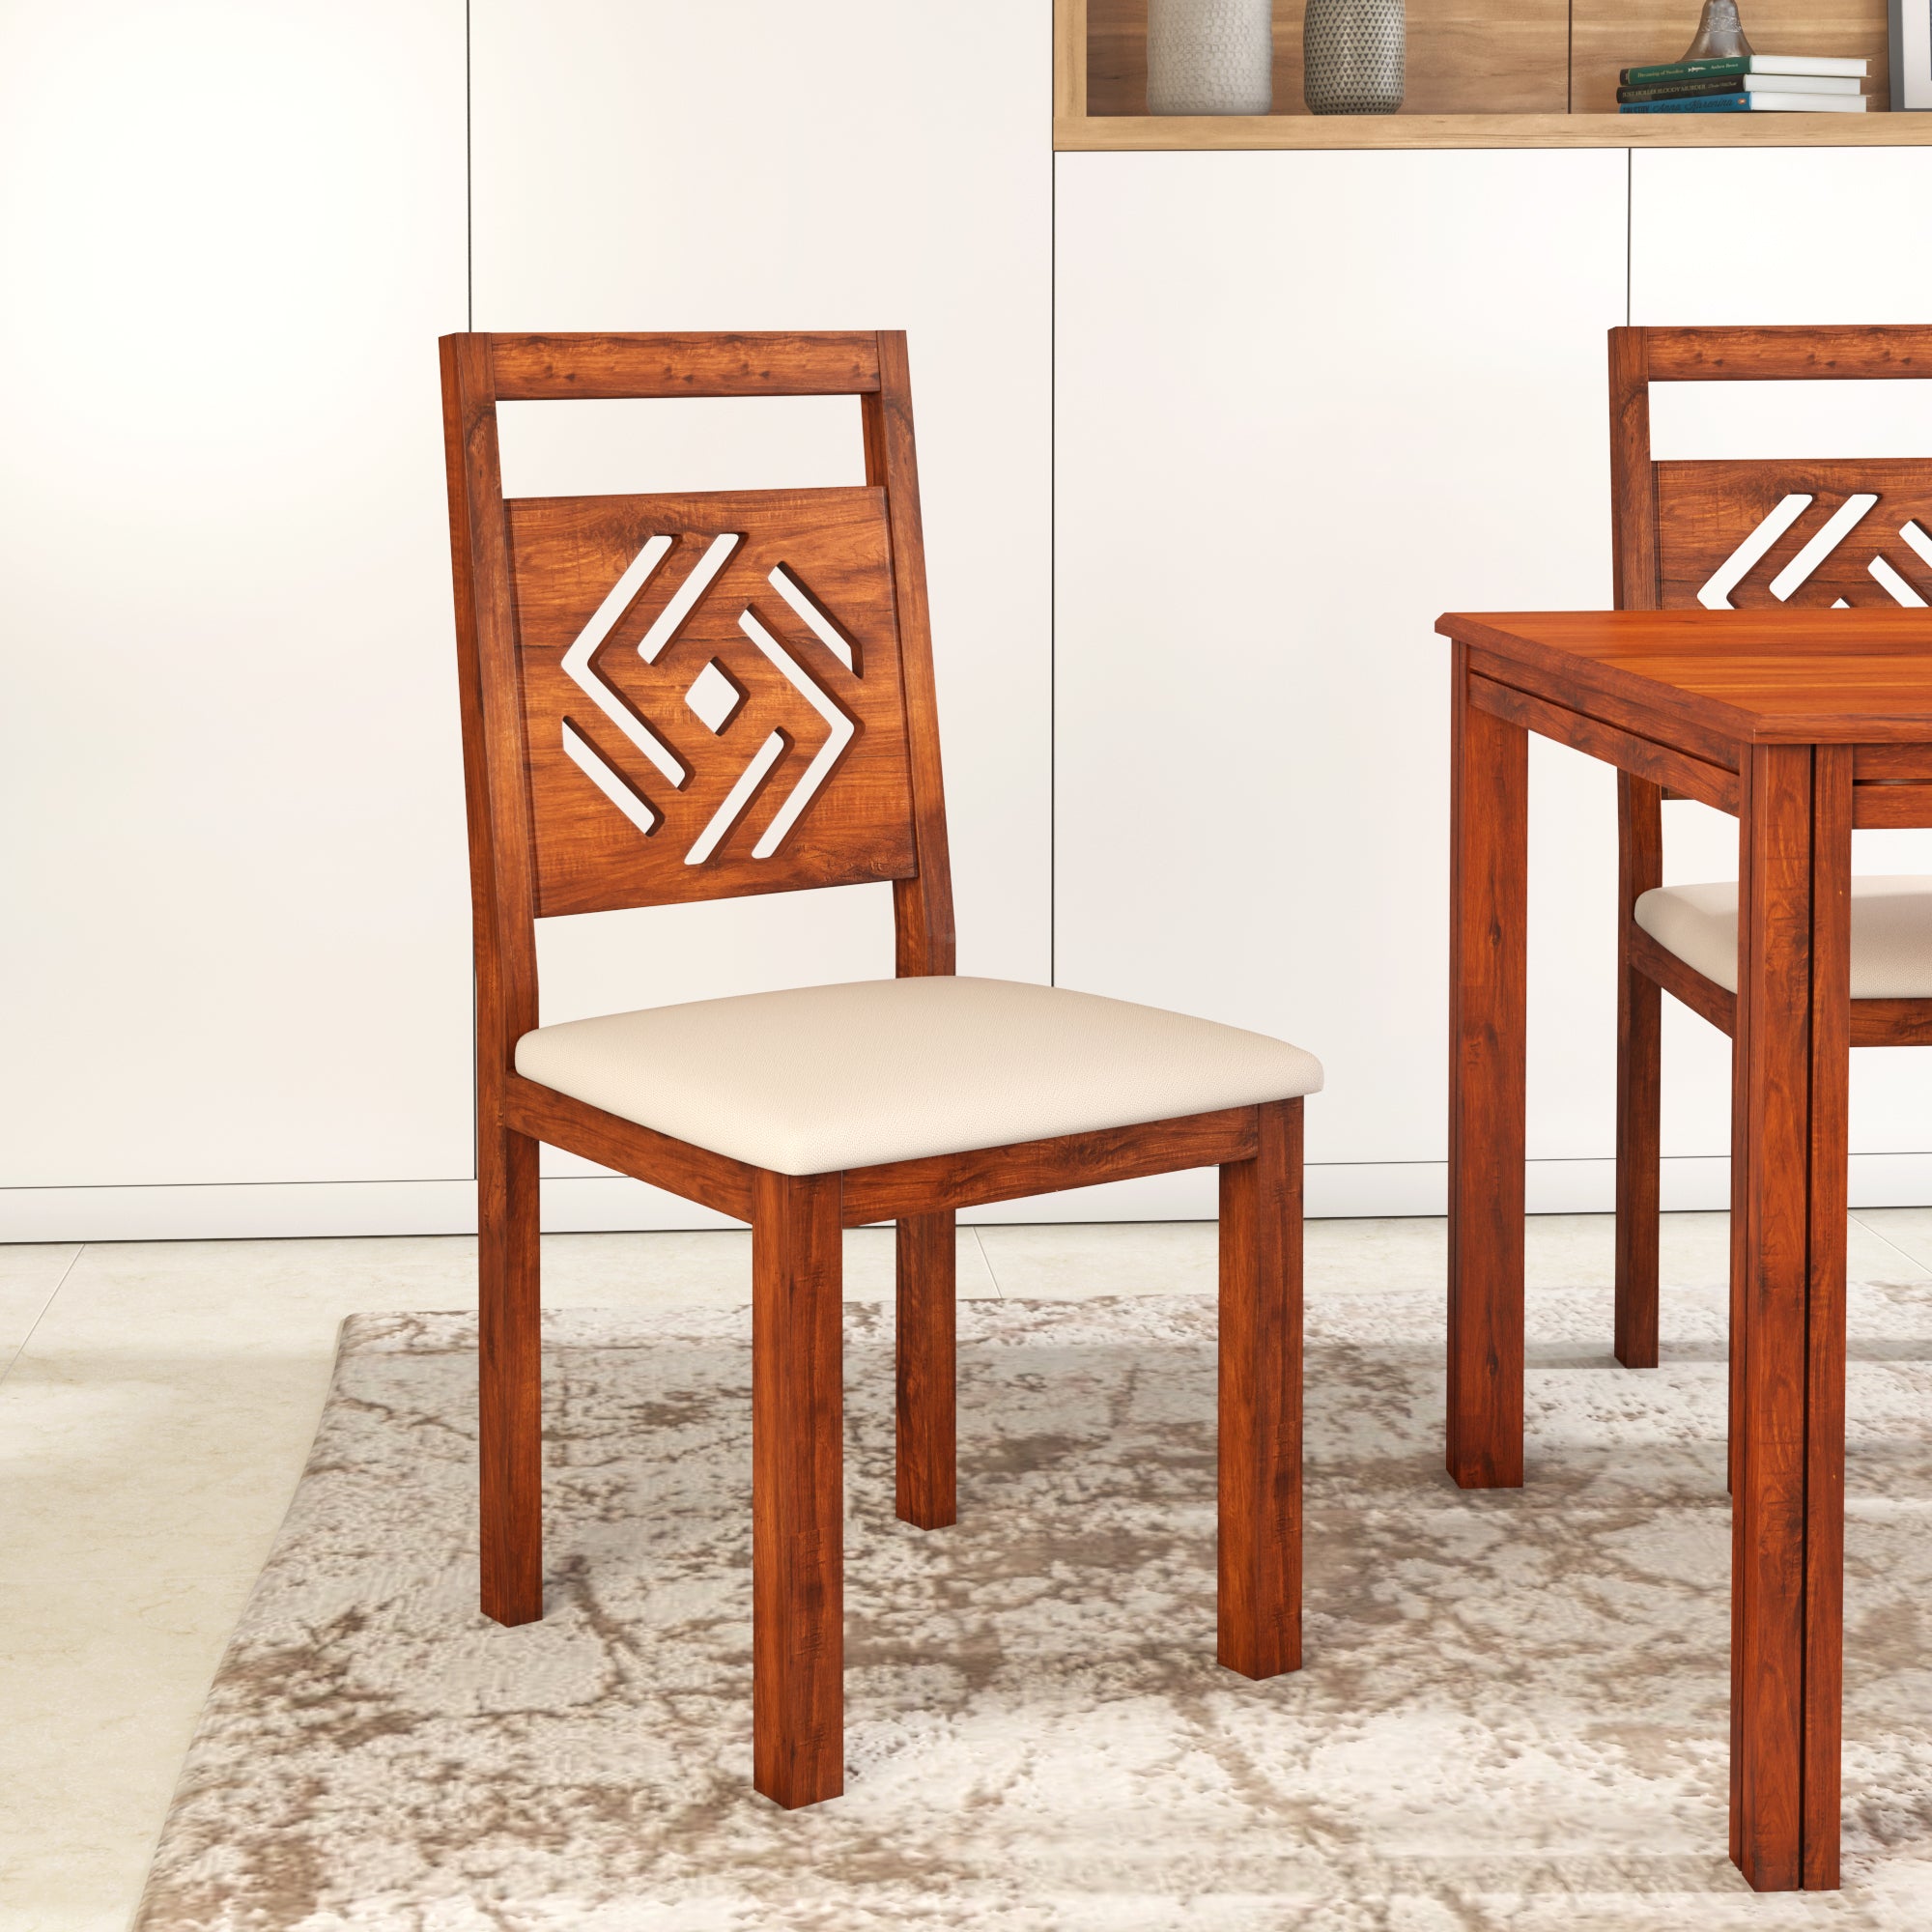 Cera Solid Wood Dining Chair (Honey Brown)